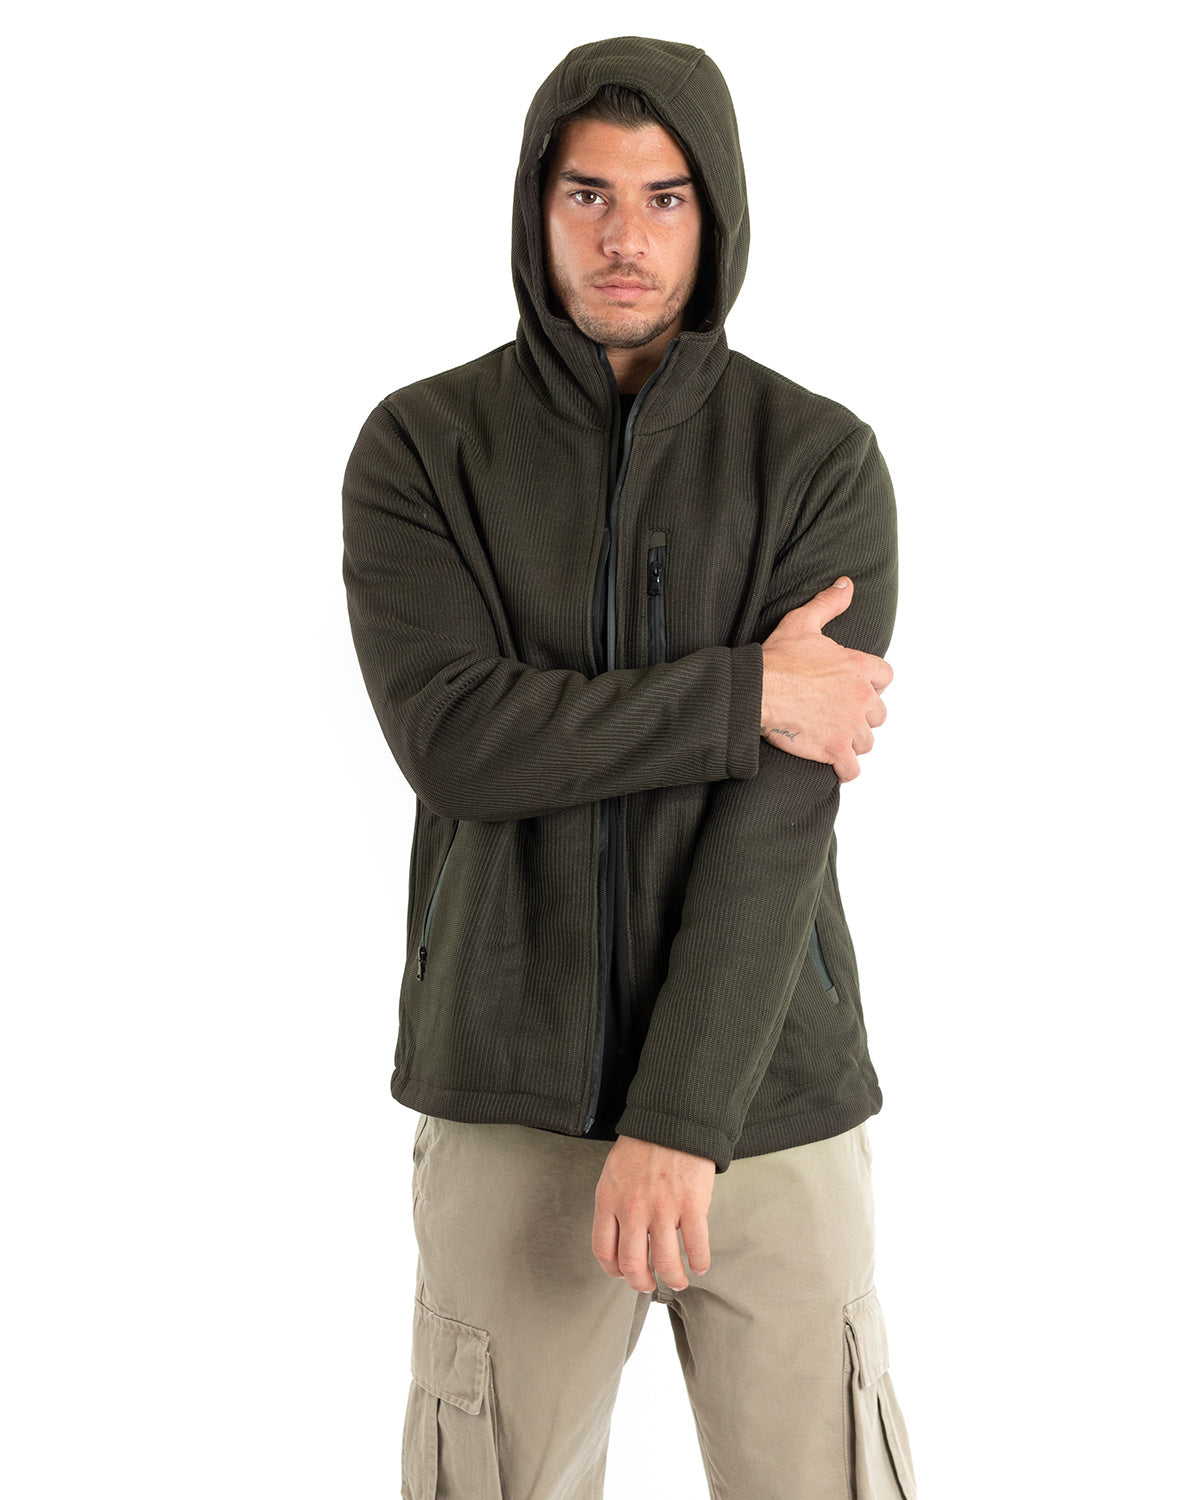 Men's Technical Bomber Jacket with Hood Solid Color Casual Green GIOSAL